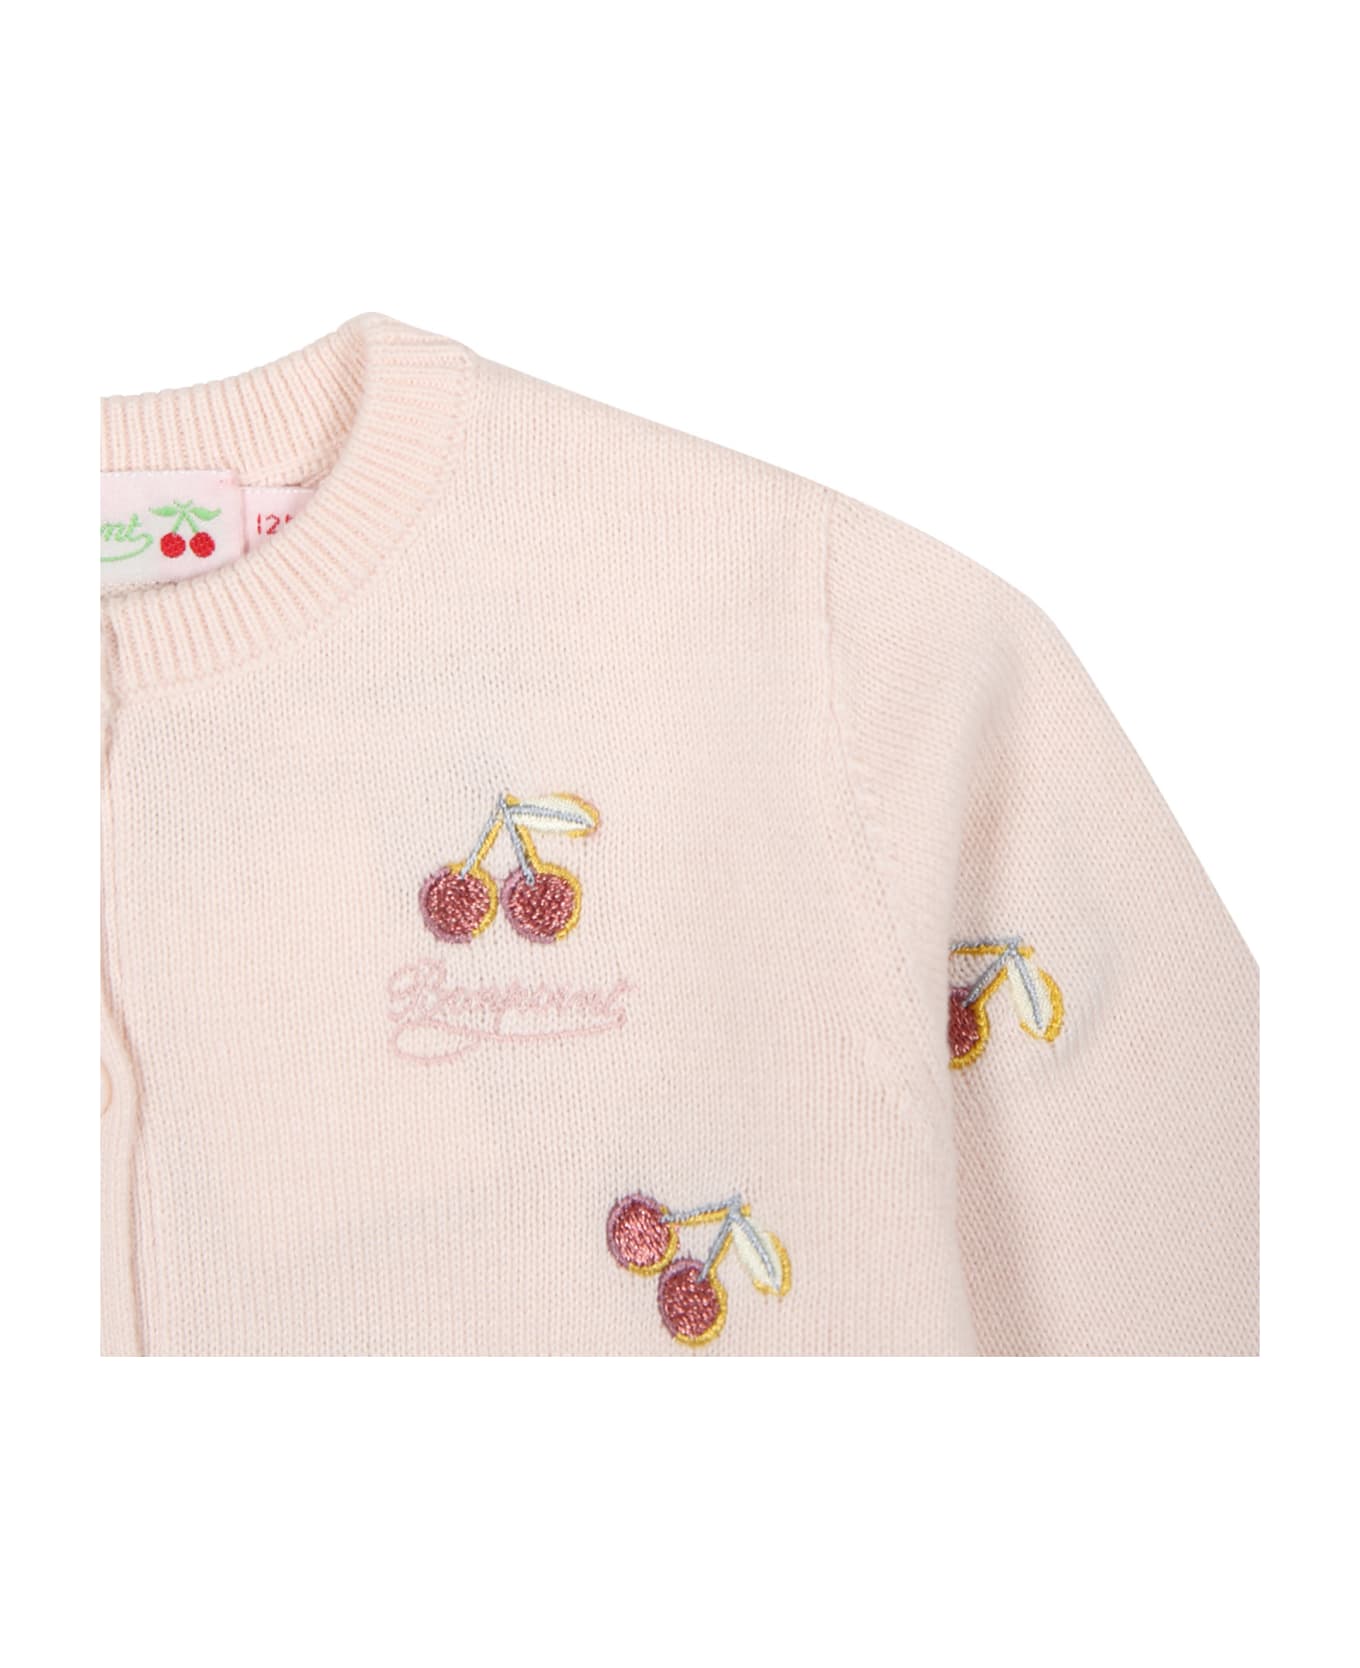 Bonpoint Pink Cardigan For Baby Girl With Cherries - Upb Rose